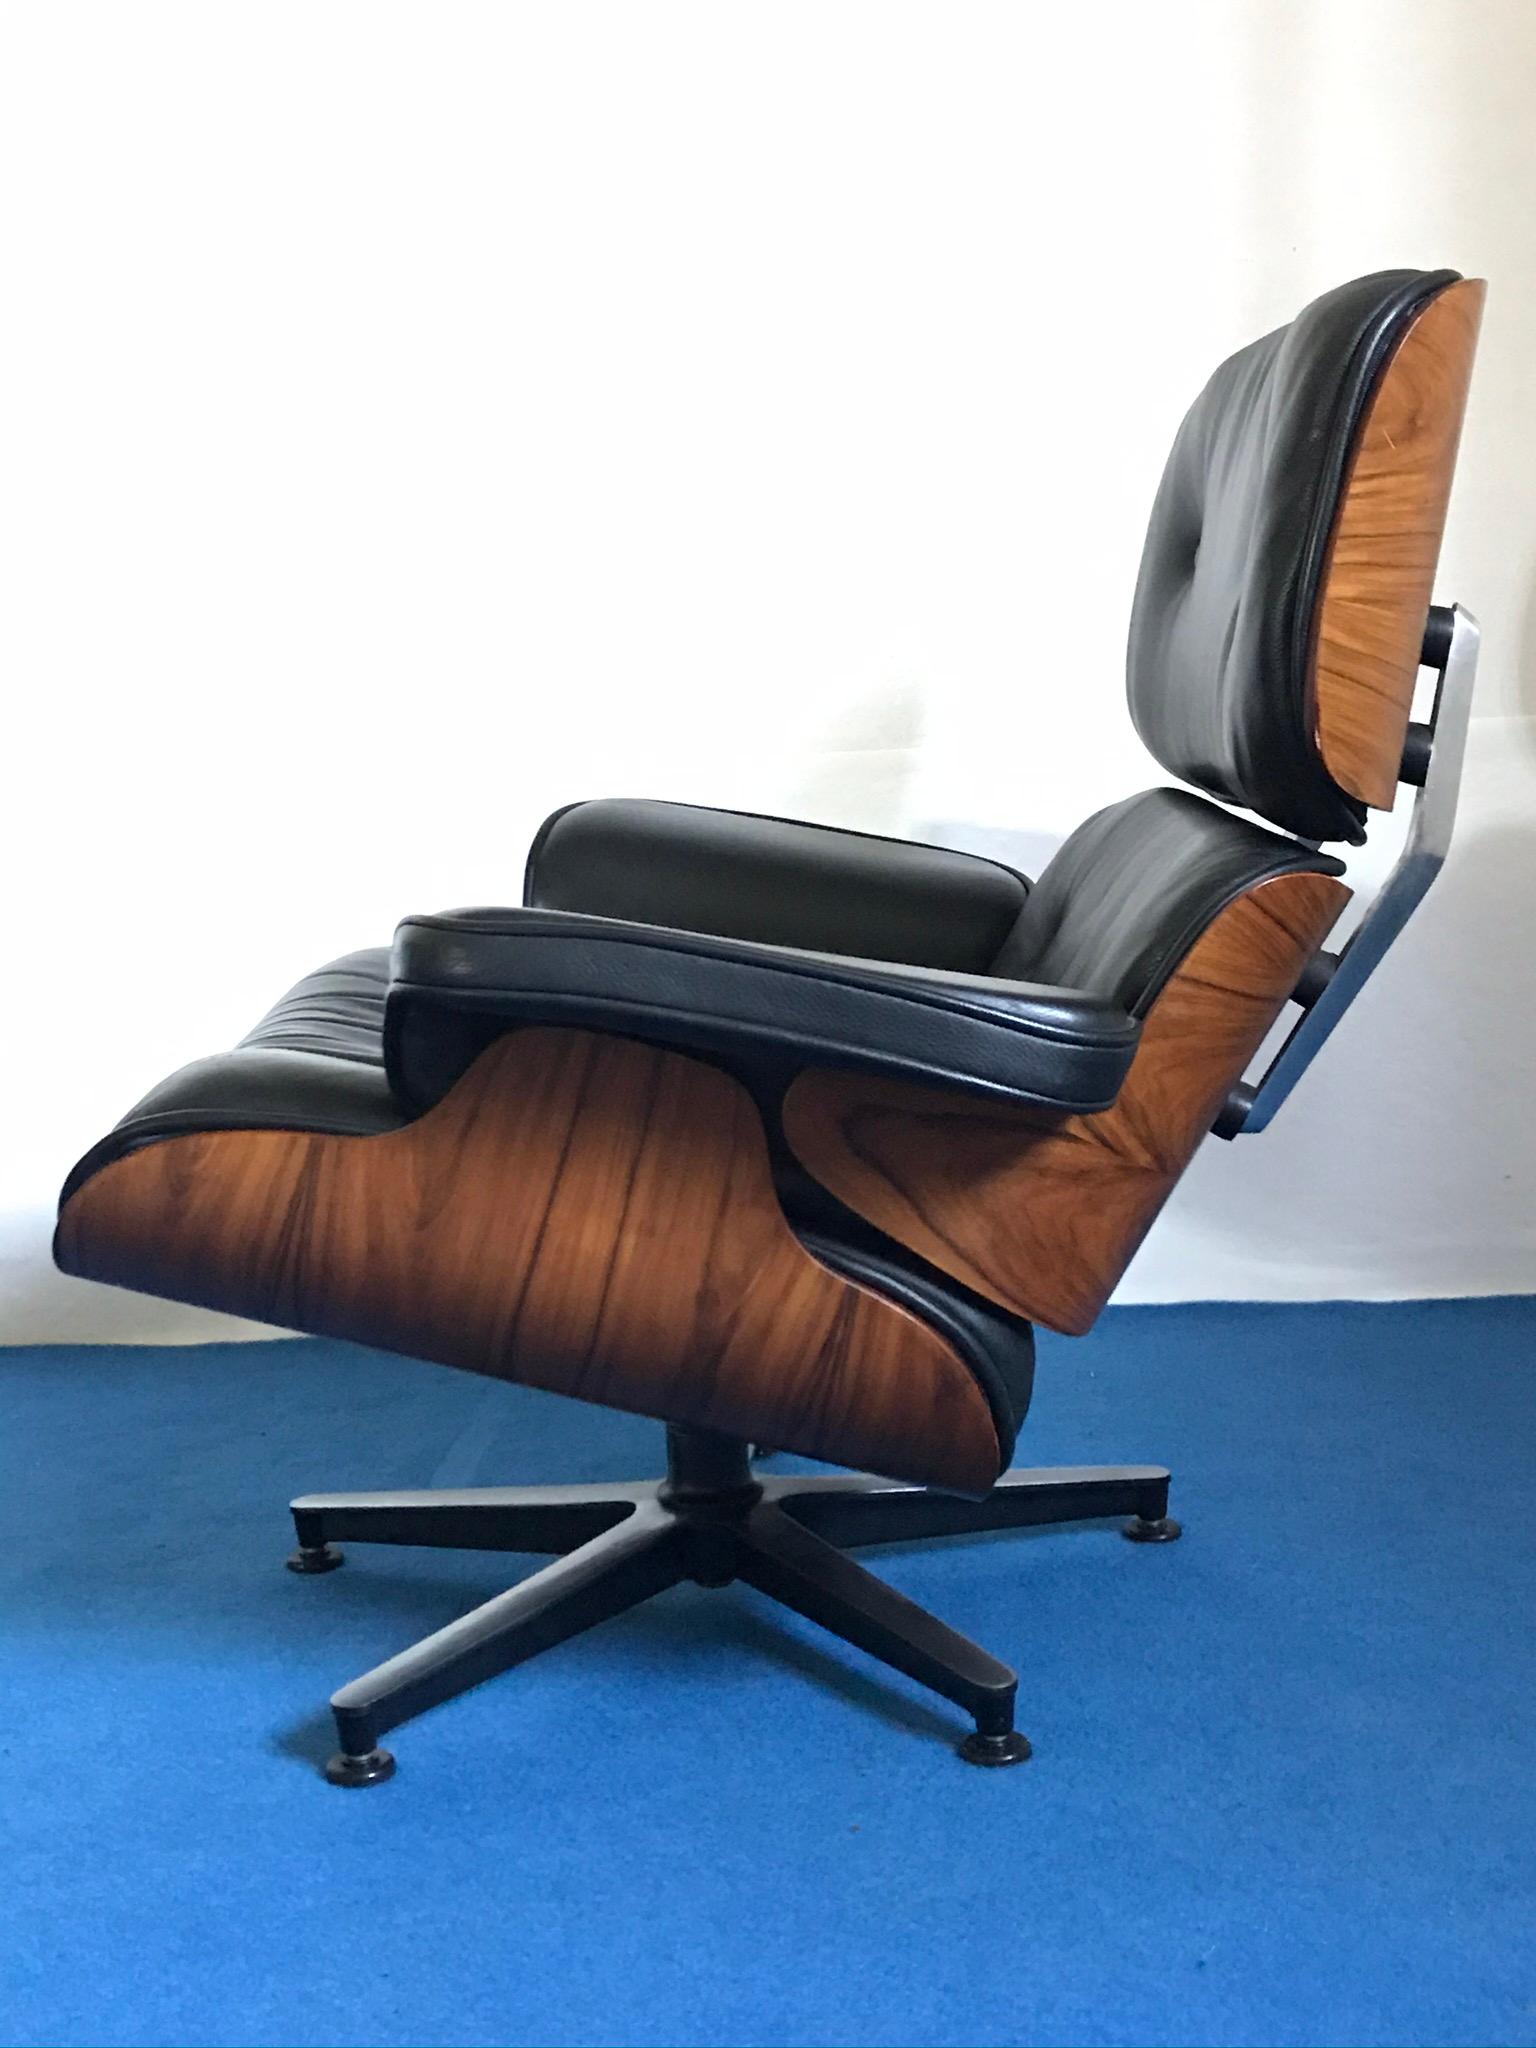 Machine-Made Charles Ray Eames Lounge Chair 670, Black Leather